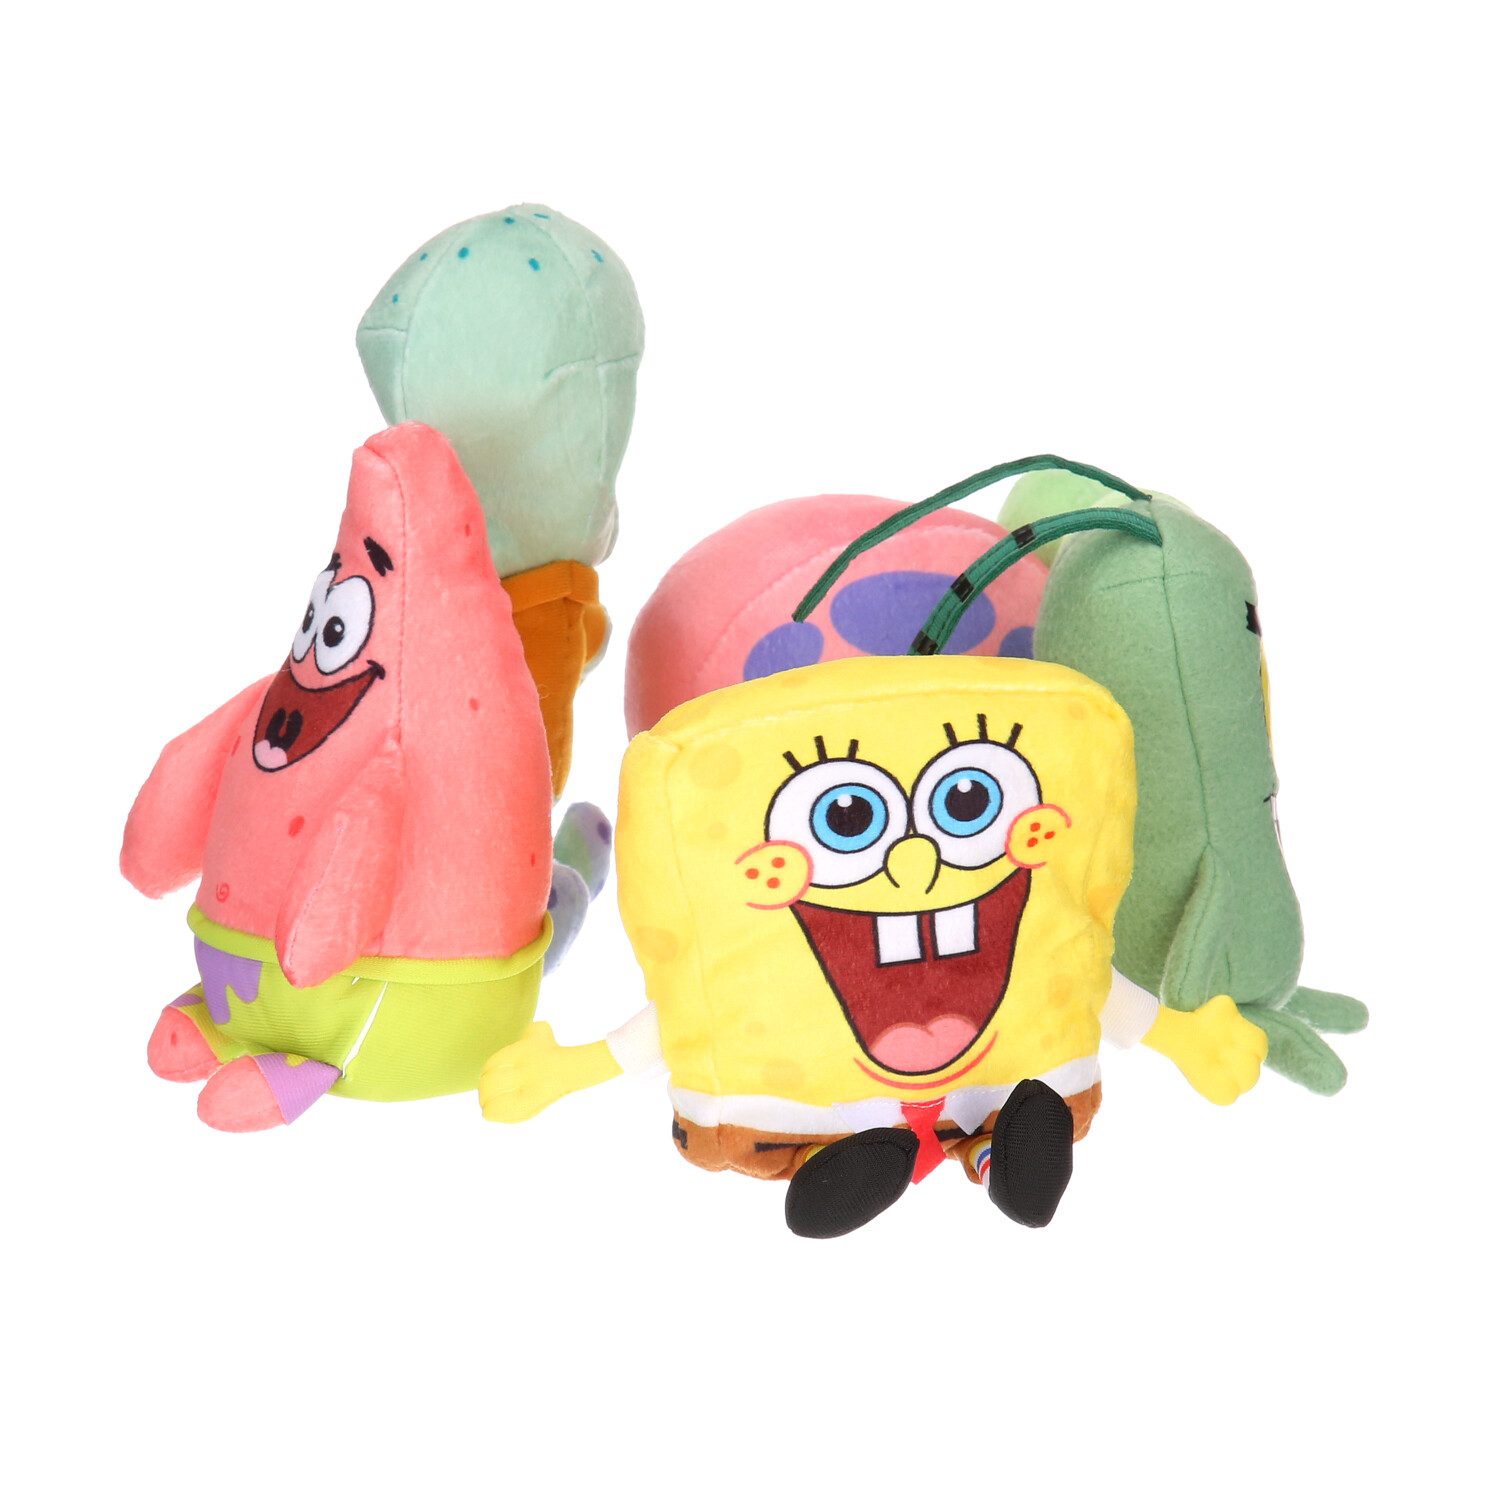 SpongeBob SquarePants Collectible Figure Set, Kids Toys for Ages 3 Up,  Gifts and Presents